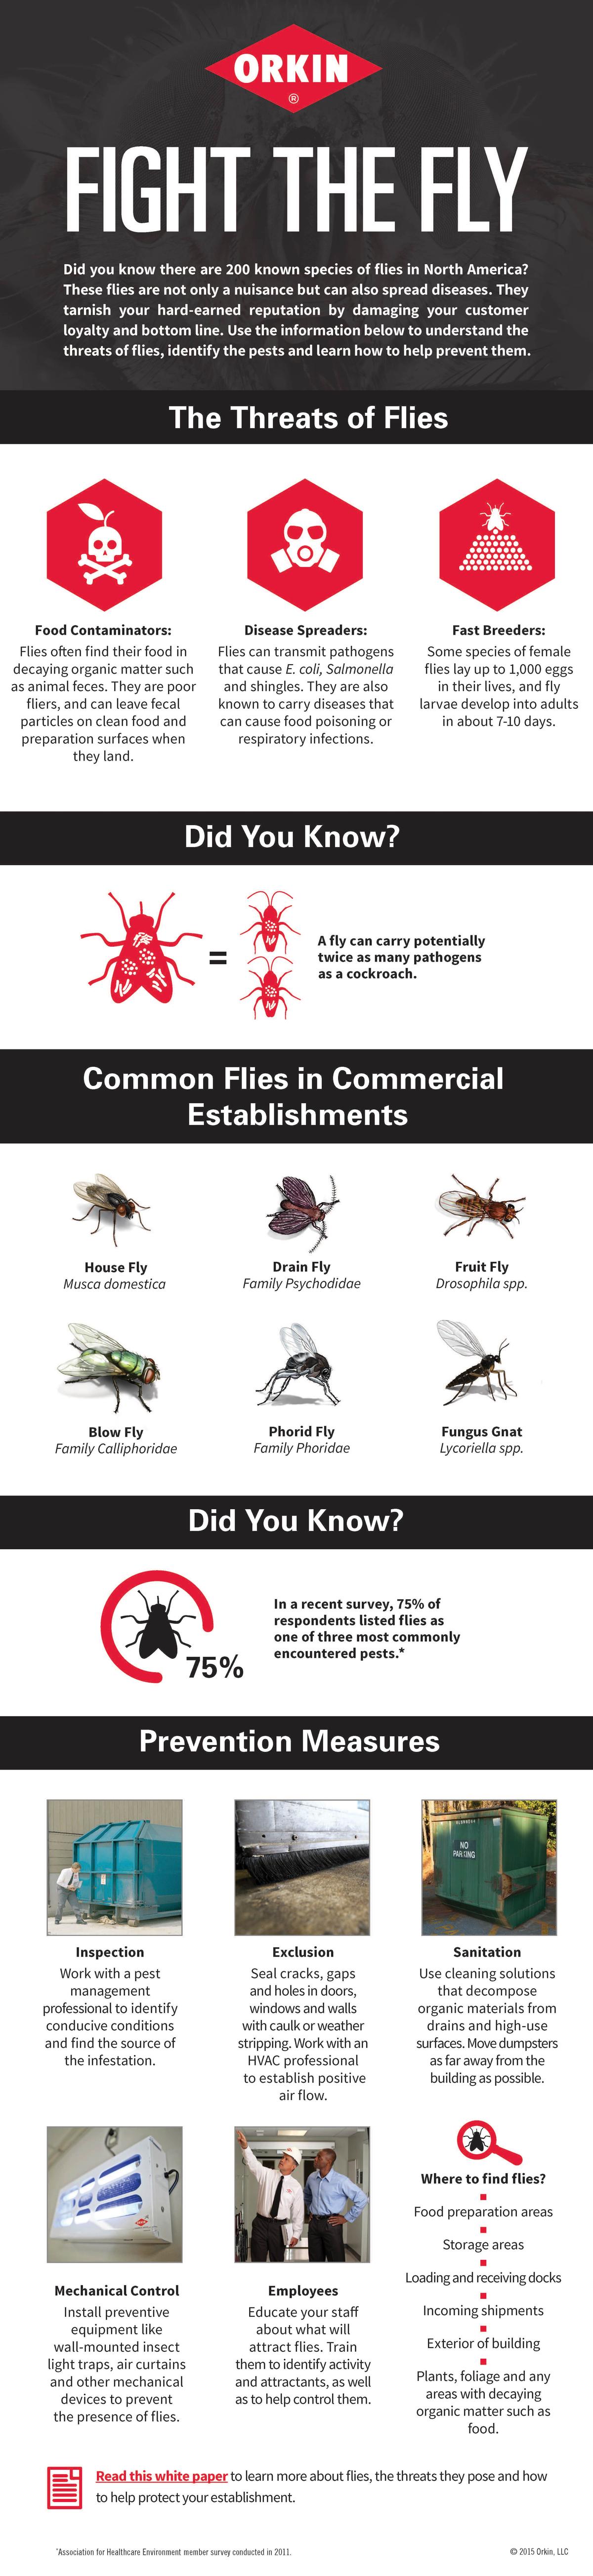 Fight the Fly Infographic